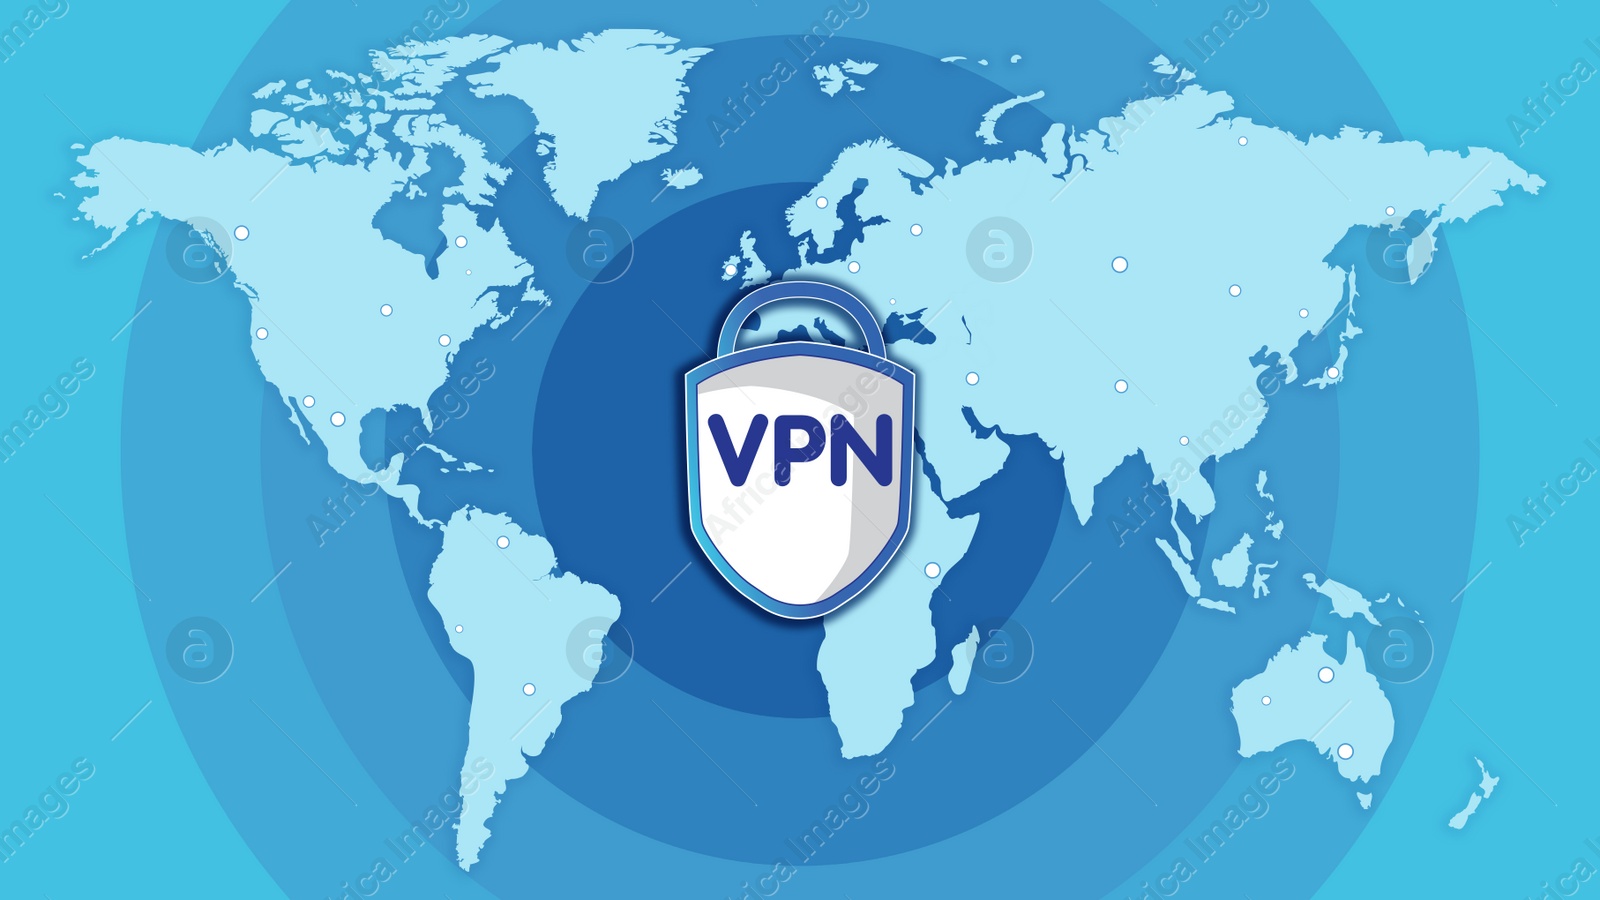 Illustration of Concept of secure network connection. Acronym VPN and world map on color background, illustration